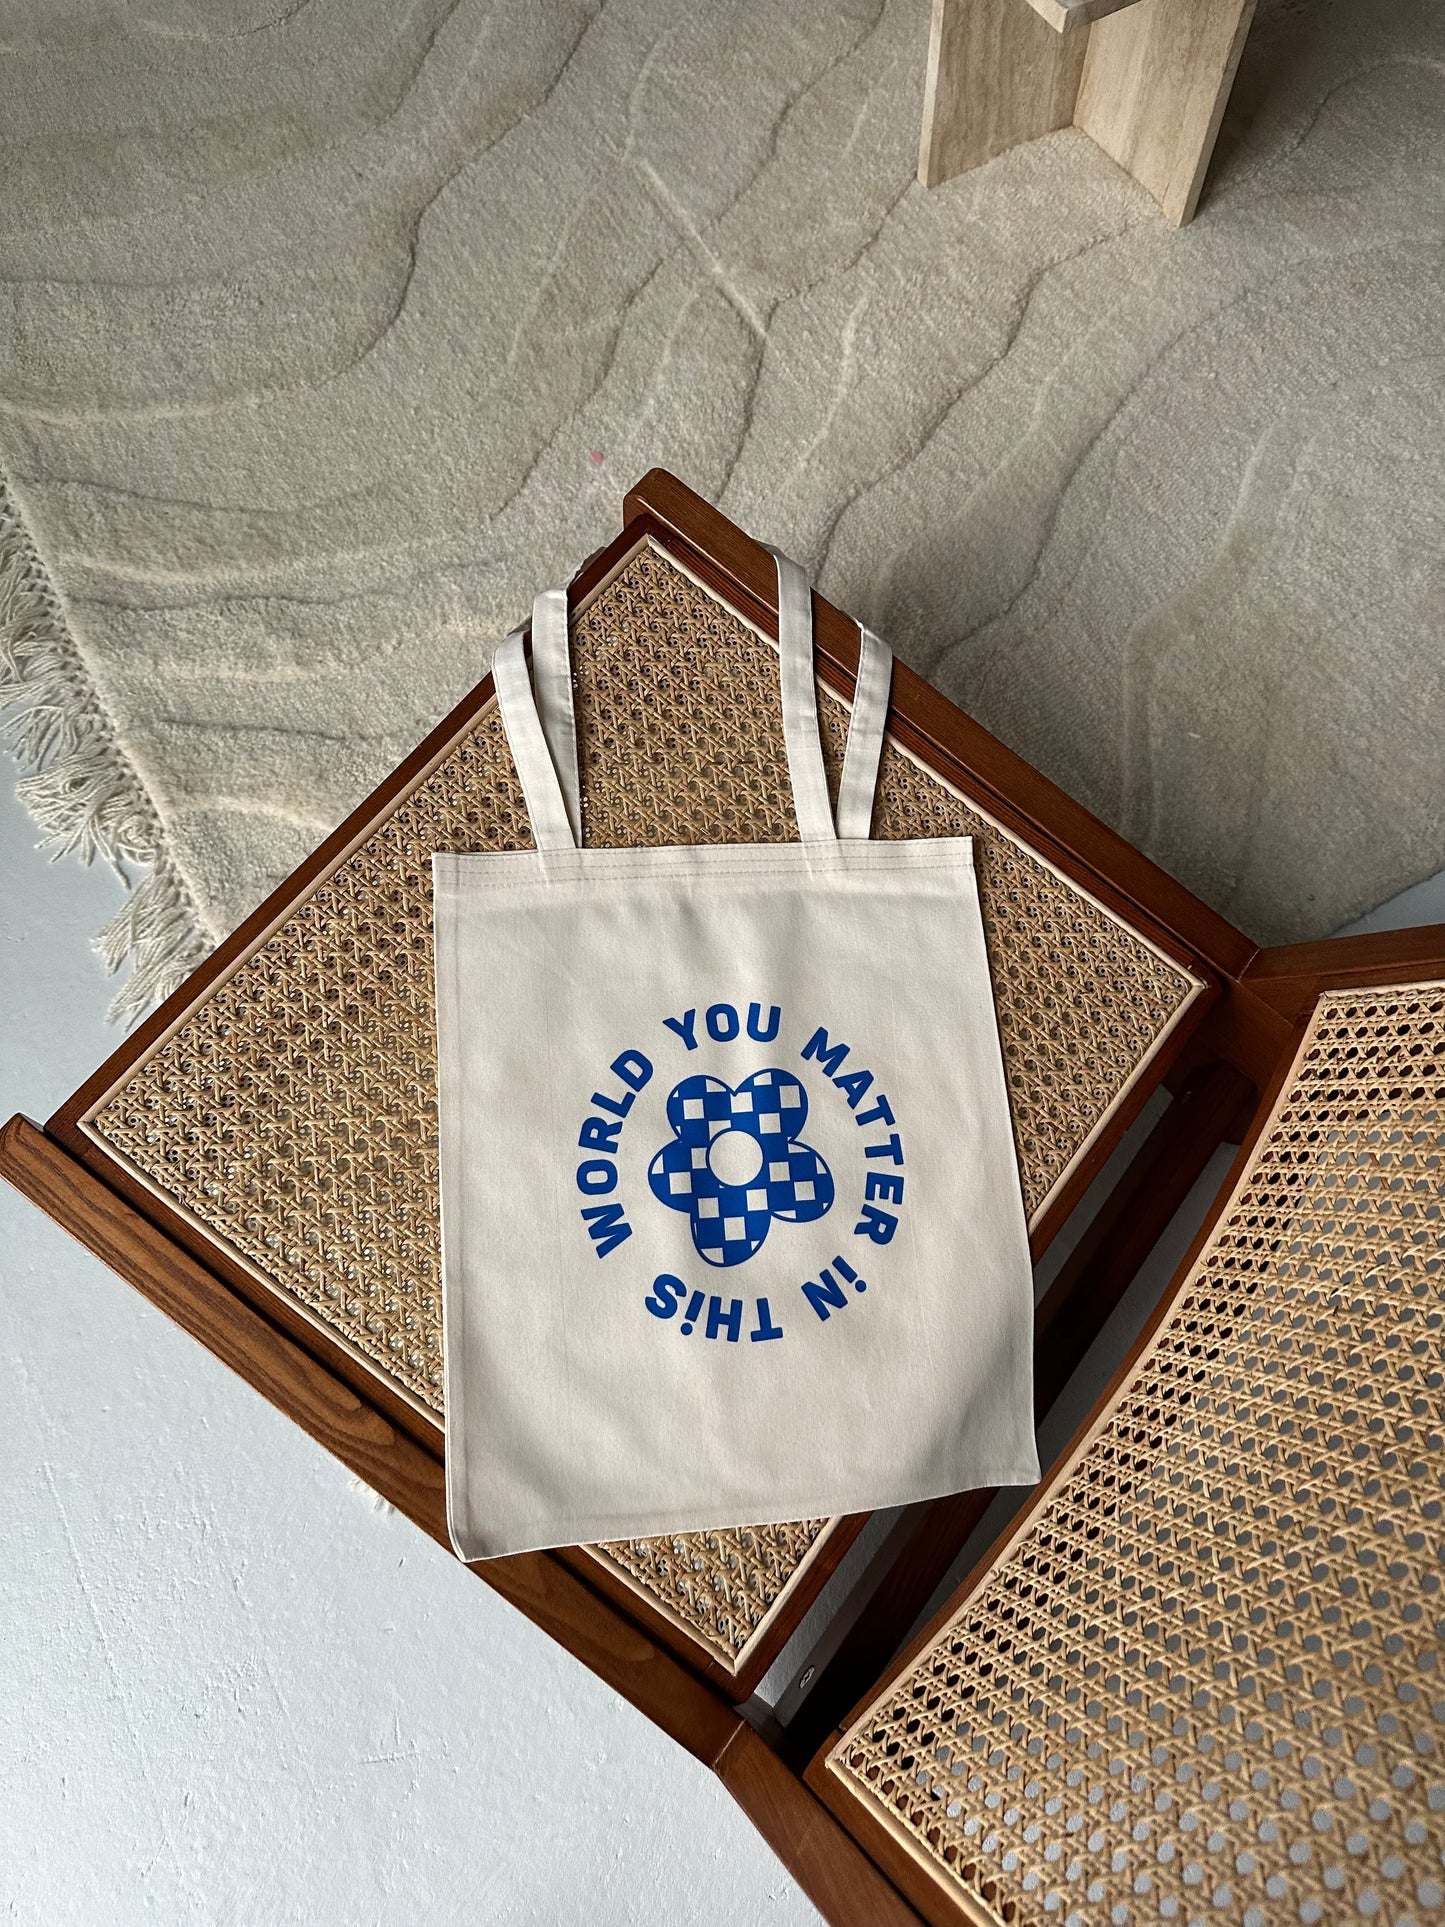 Tote bag "You matter in this world"